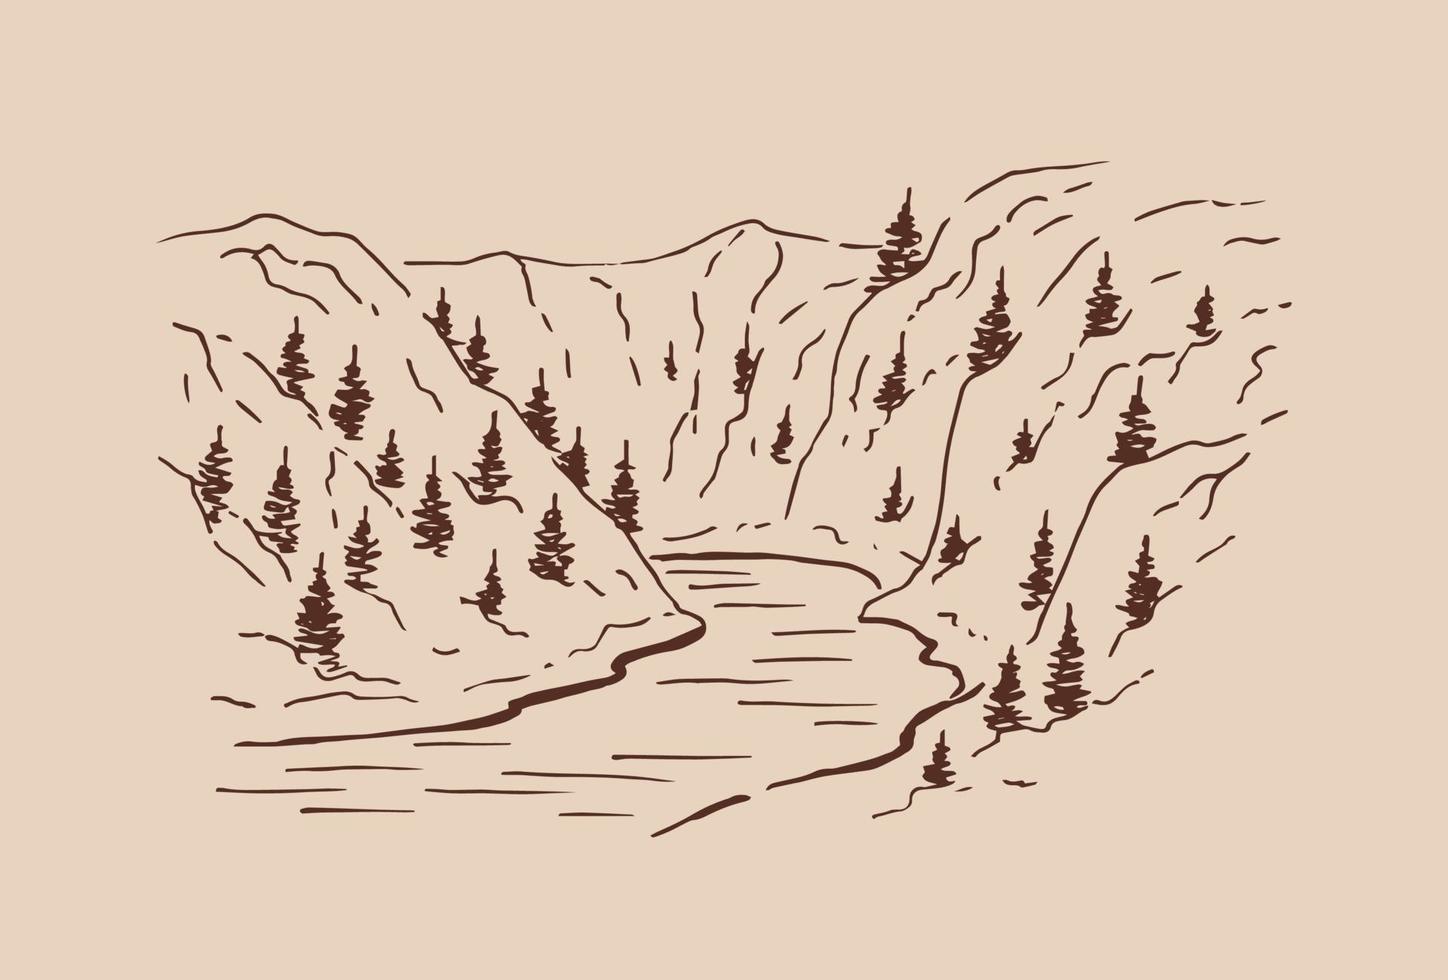 Landscape with mountains and forest. Hand drawn illustration converted to vector. vector